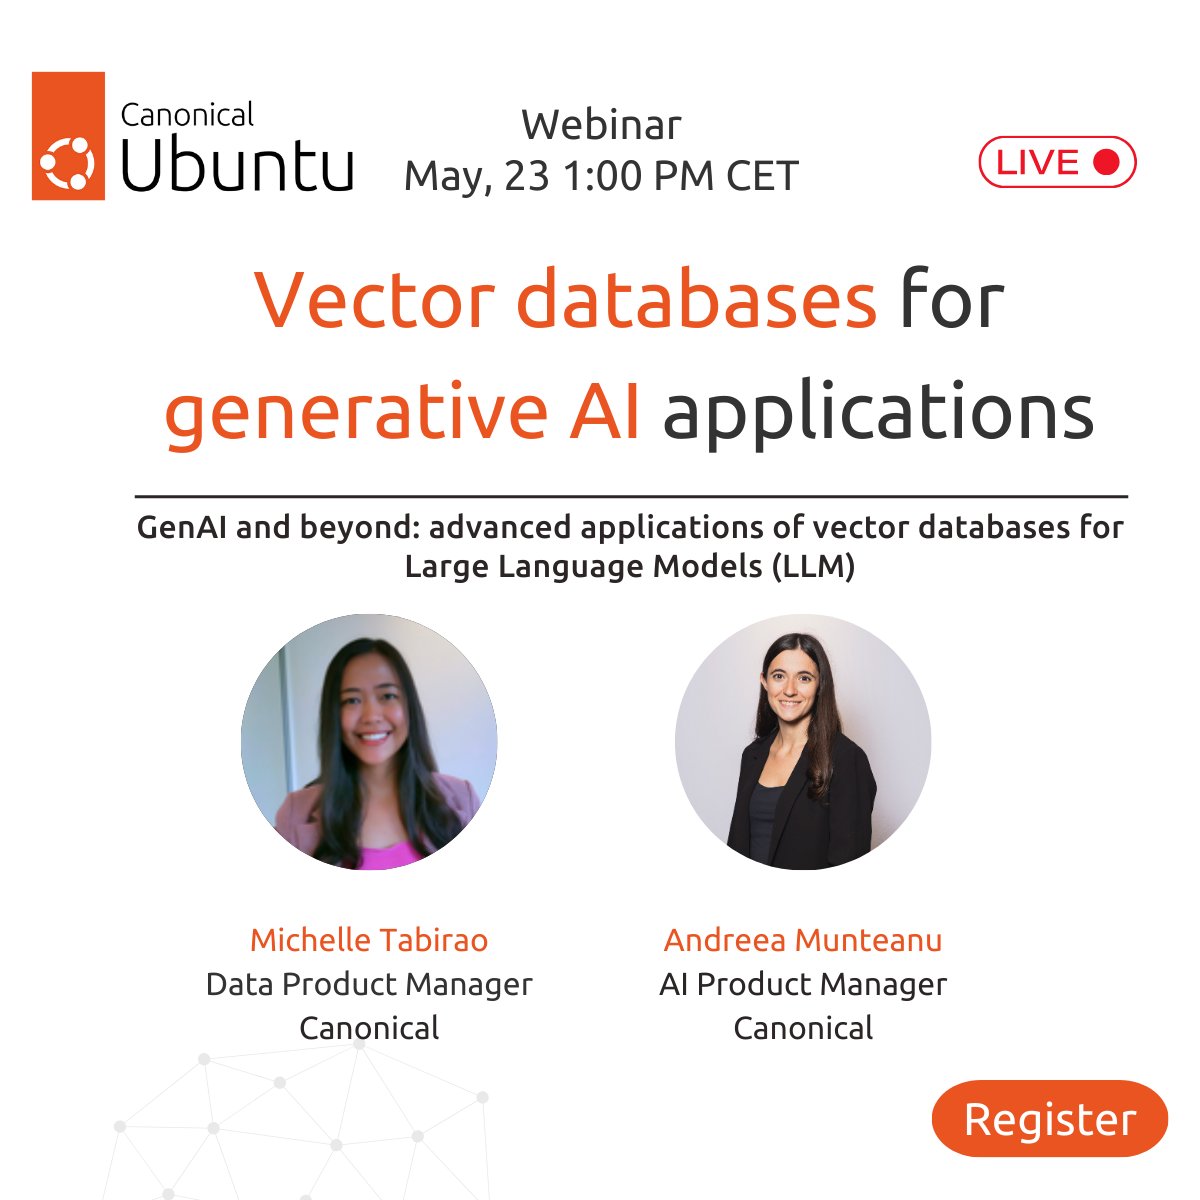 On May 23, we will host a webinar on 'Vector Databases for Generative AI Applications.' We will talk about GenAI and explore advanced applications of vector databases for Large Language Models (LLMs). Join us! 🙌 ubuntu.com/engage/vector-… #LLM #GenAI #GenerativeAI #AI